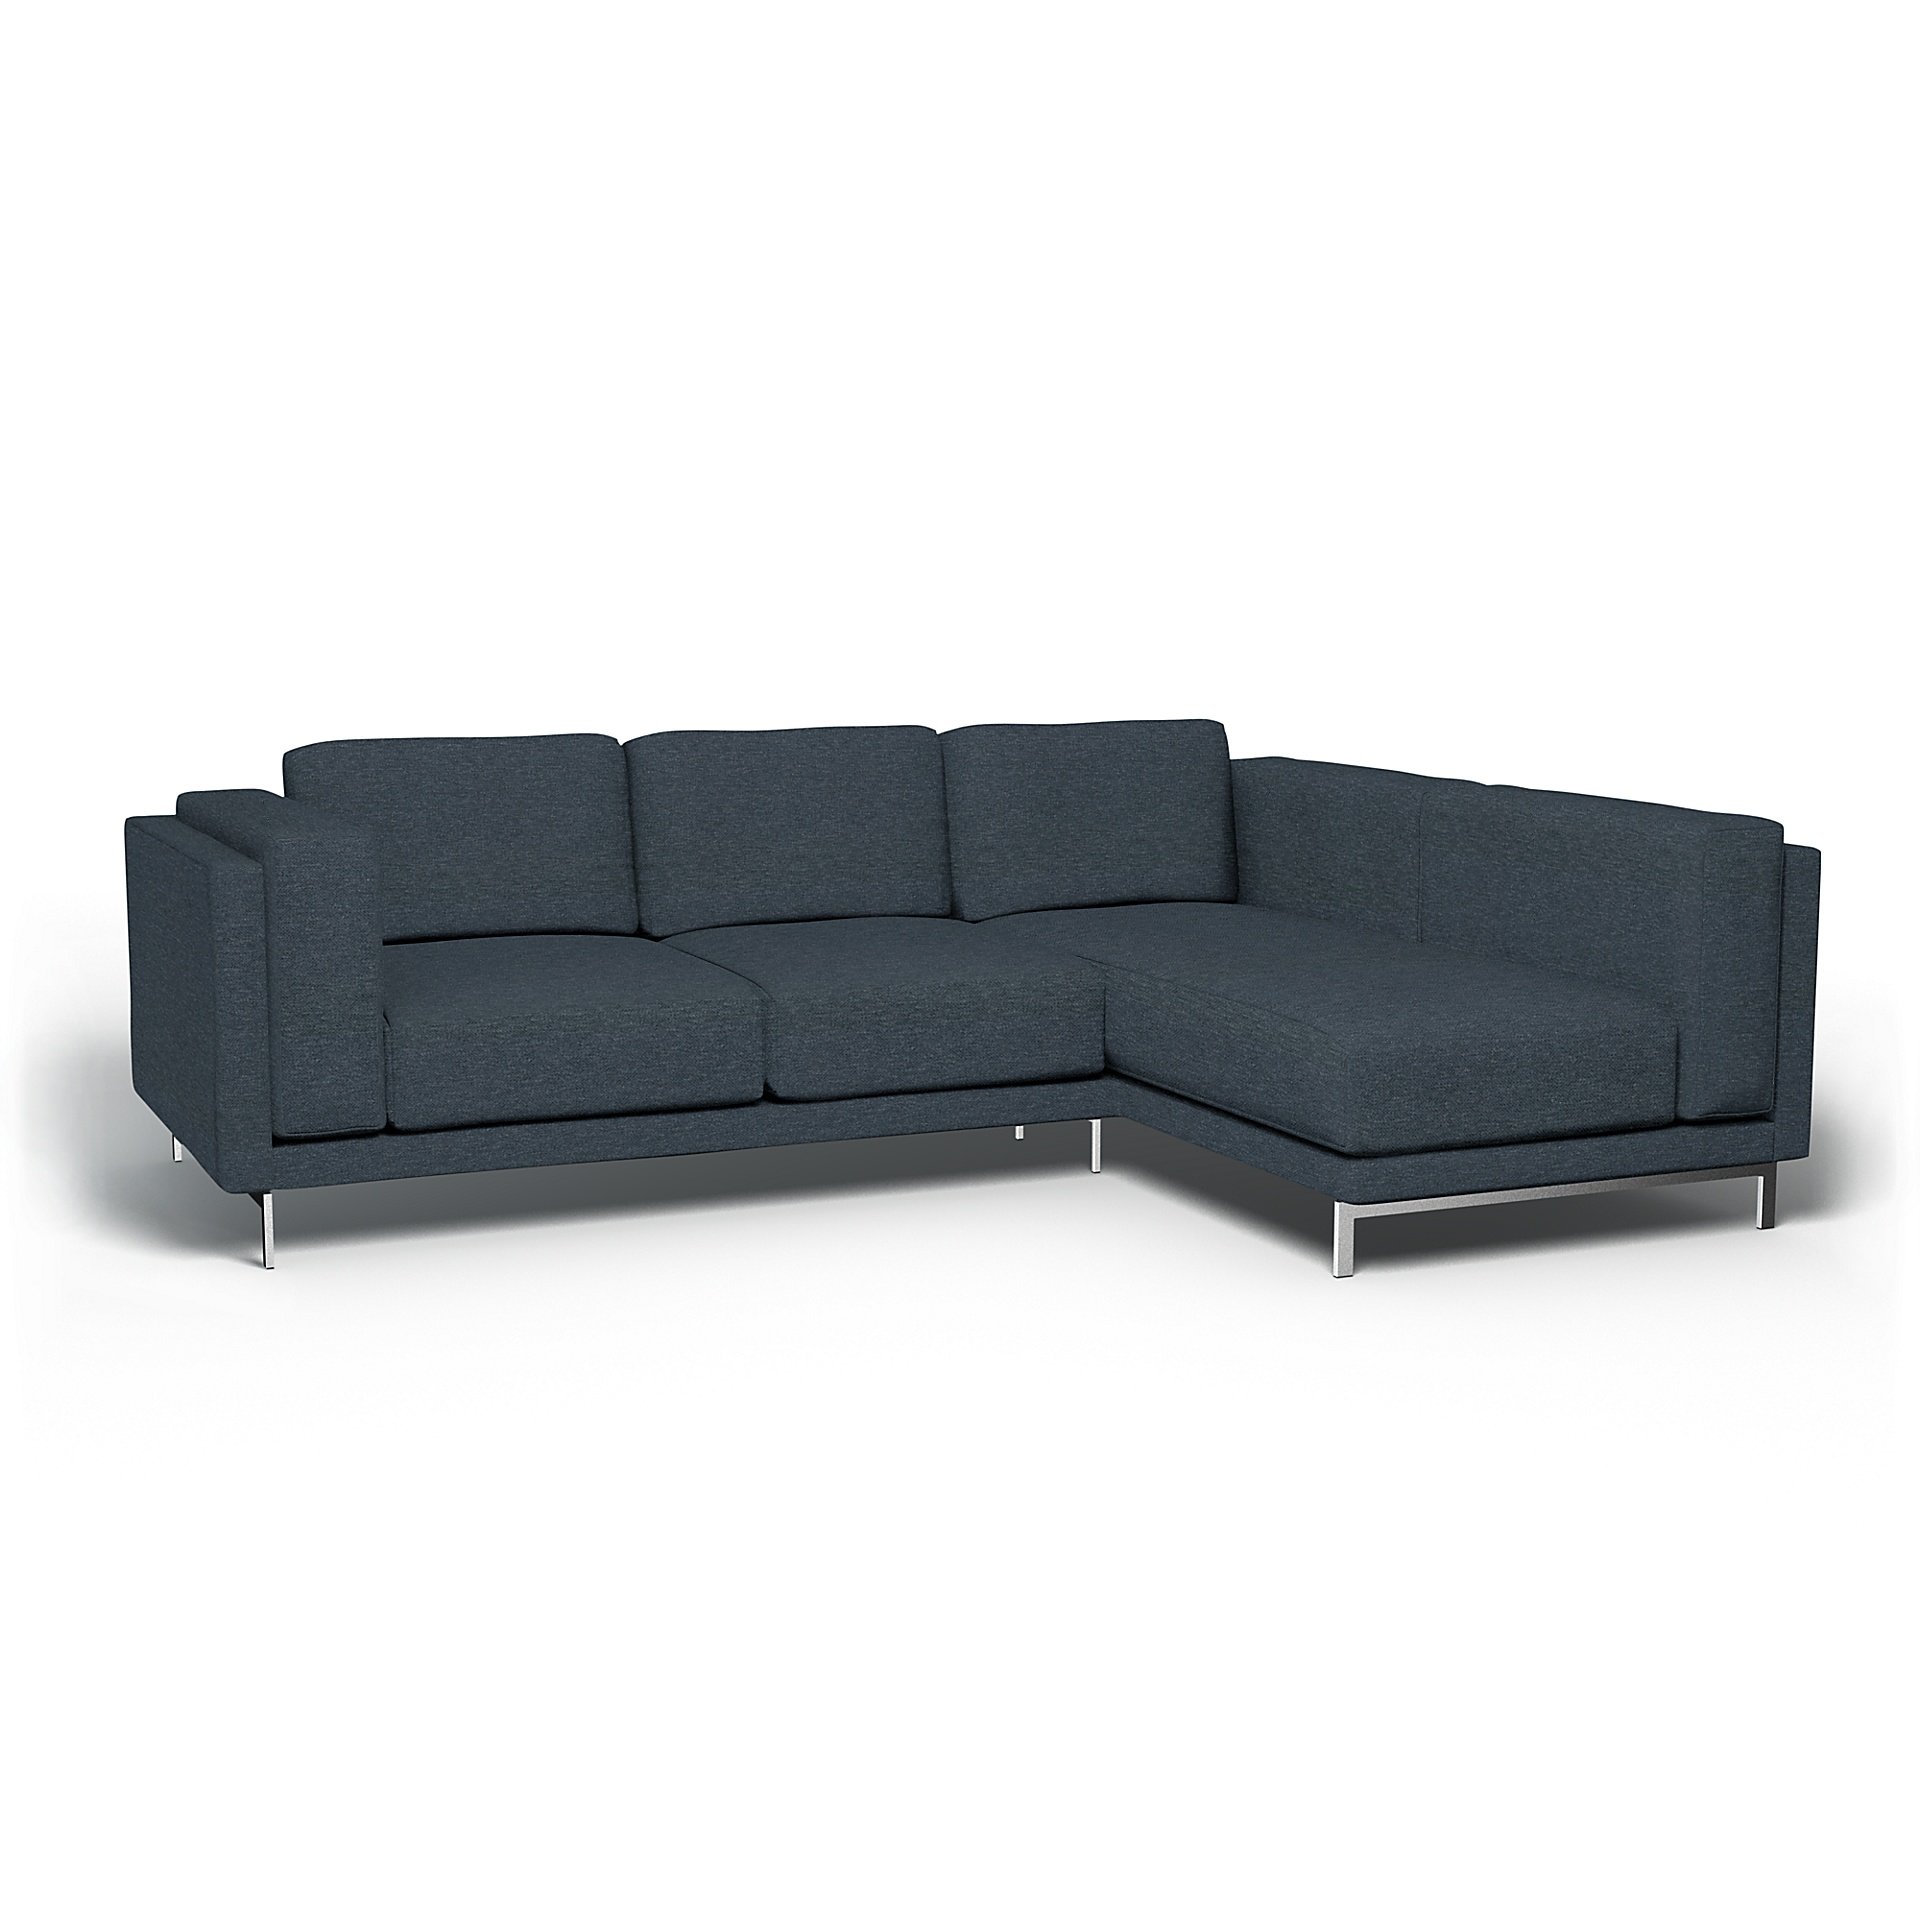 IKEA - Nockeby 3 Seat Sofa with Right Chaise Cover, Denim, Boucle & Texture - Bemz